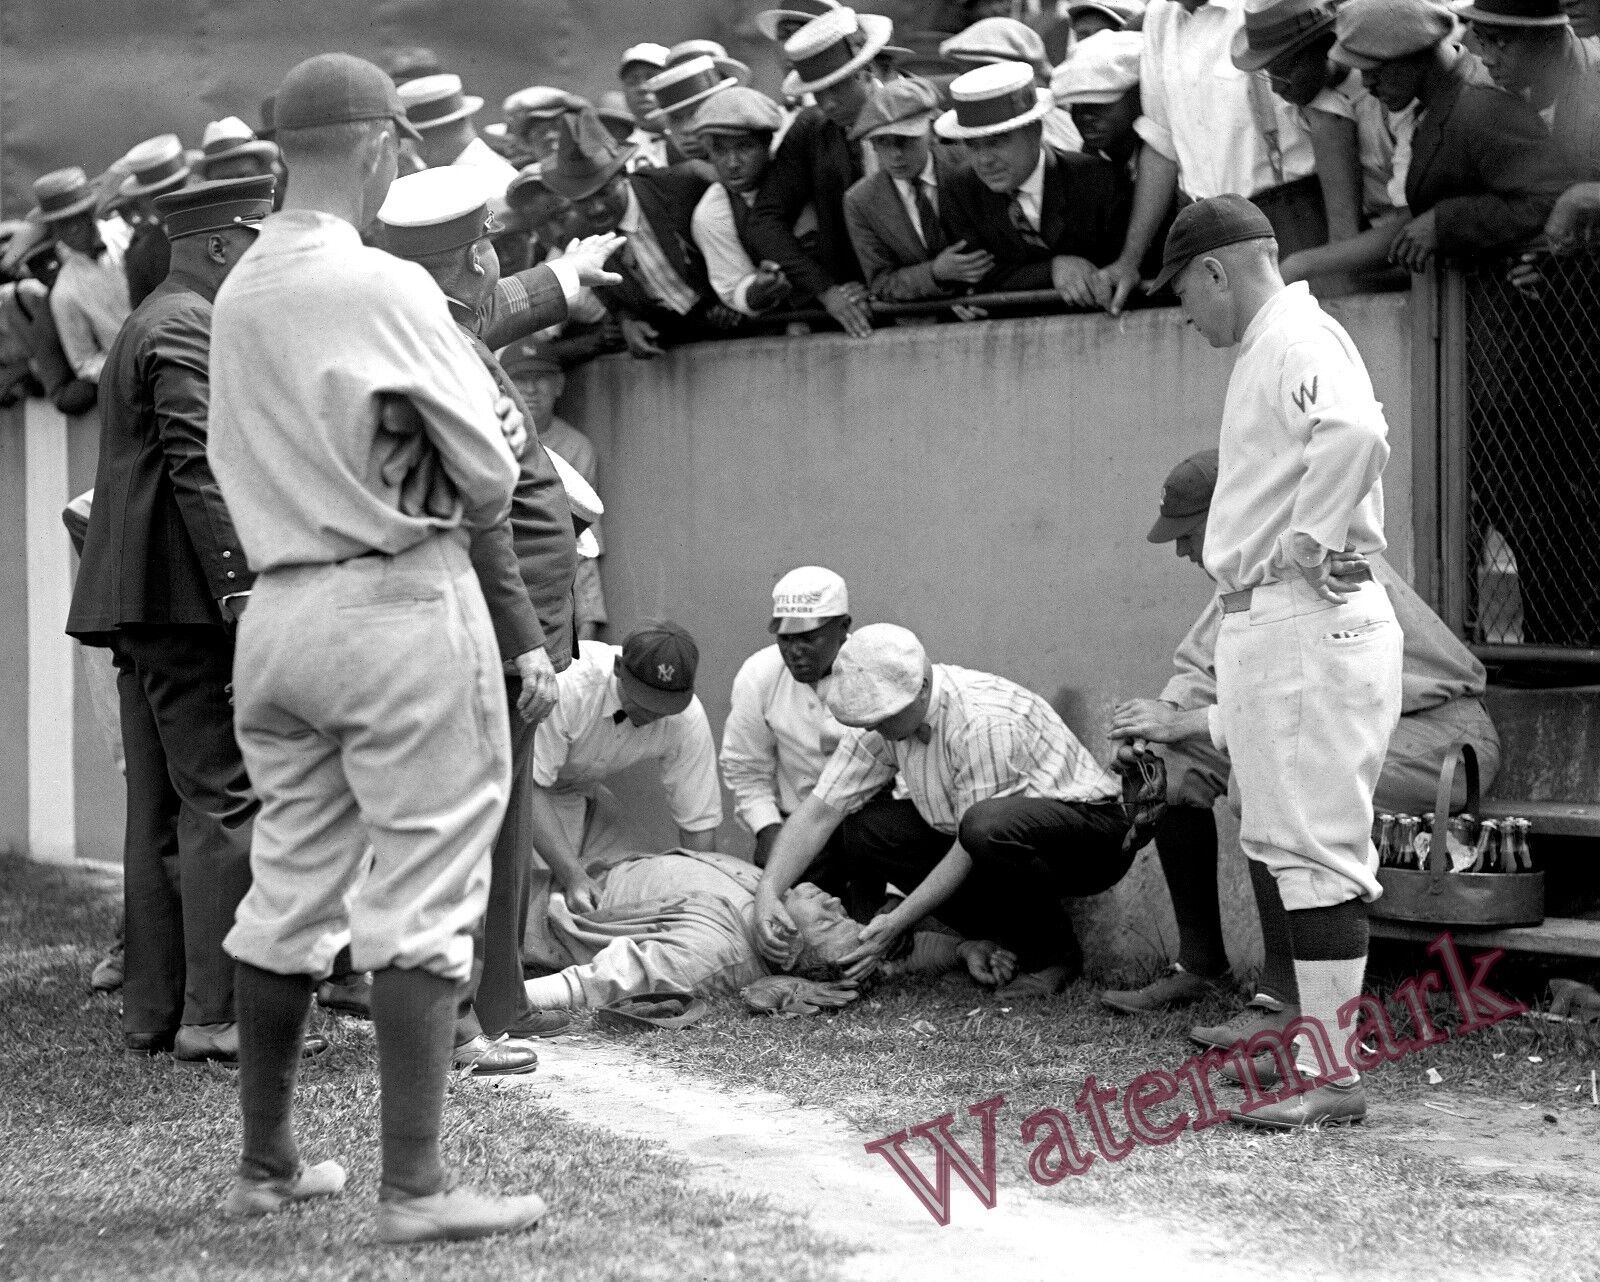 Baseball Babe Ruth Knocked Out at Griffith Stadium Year 1924 8x10 Photo